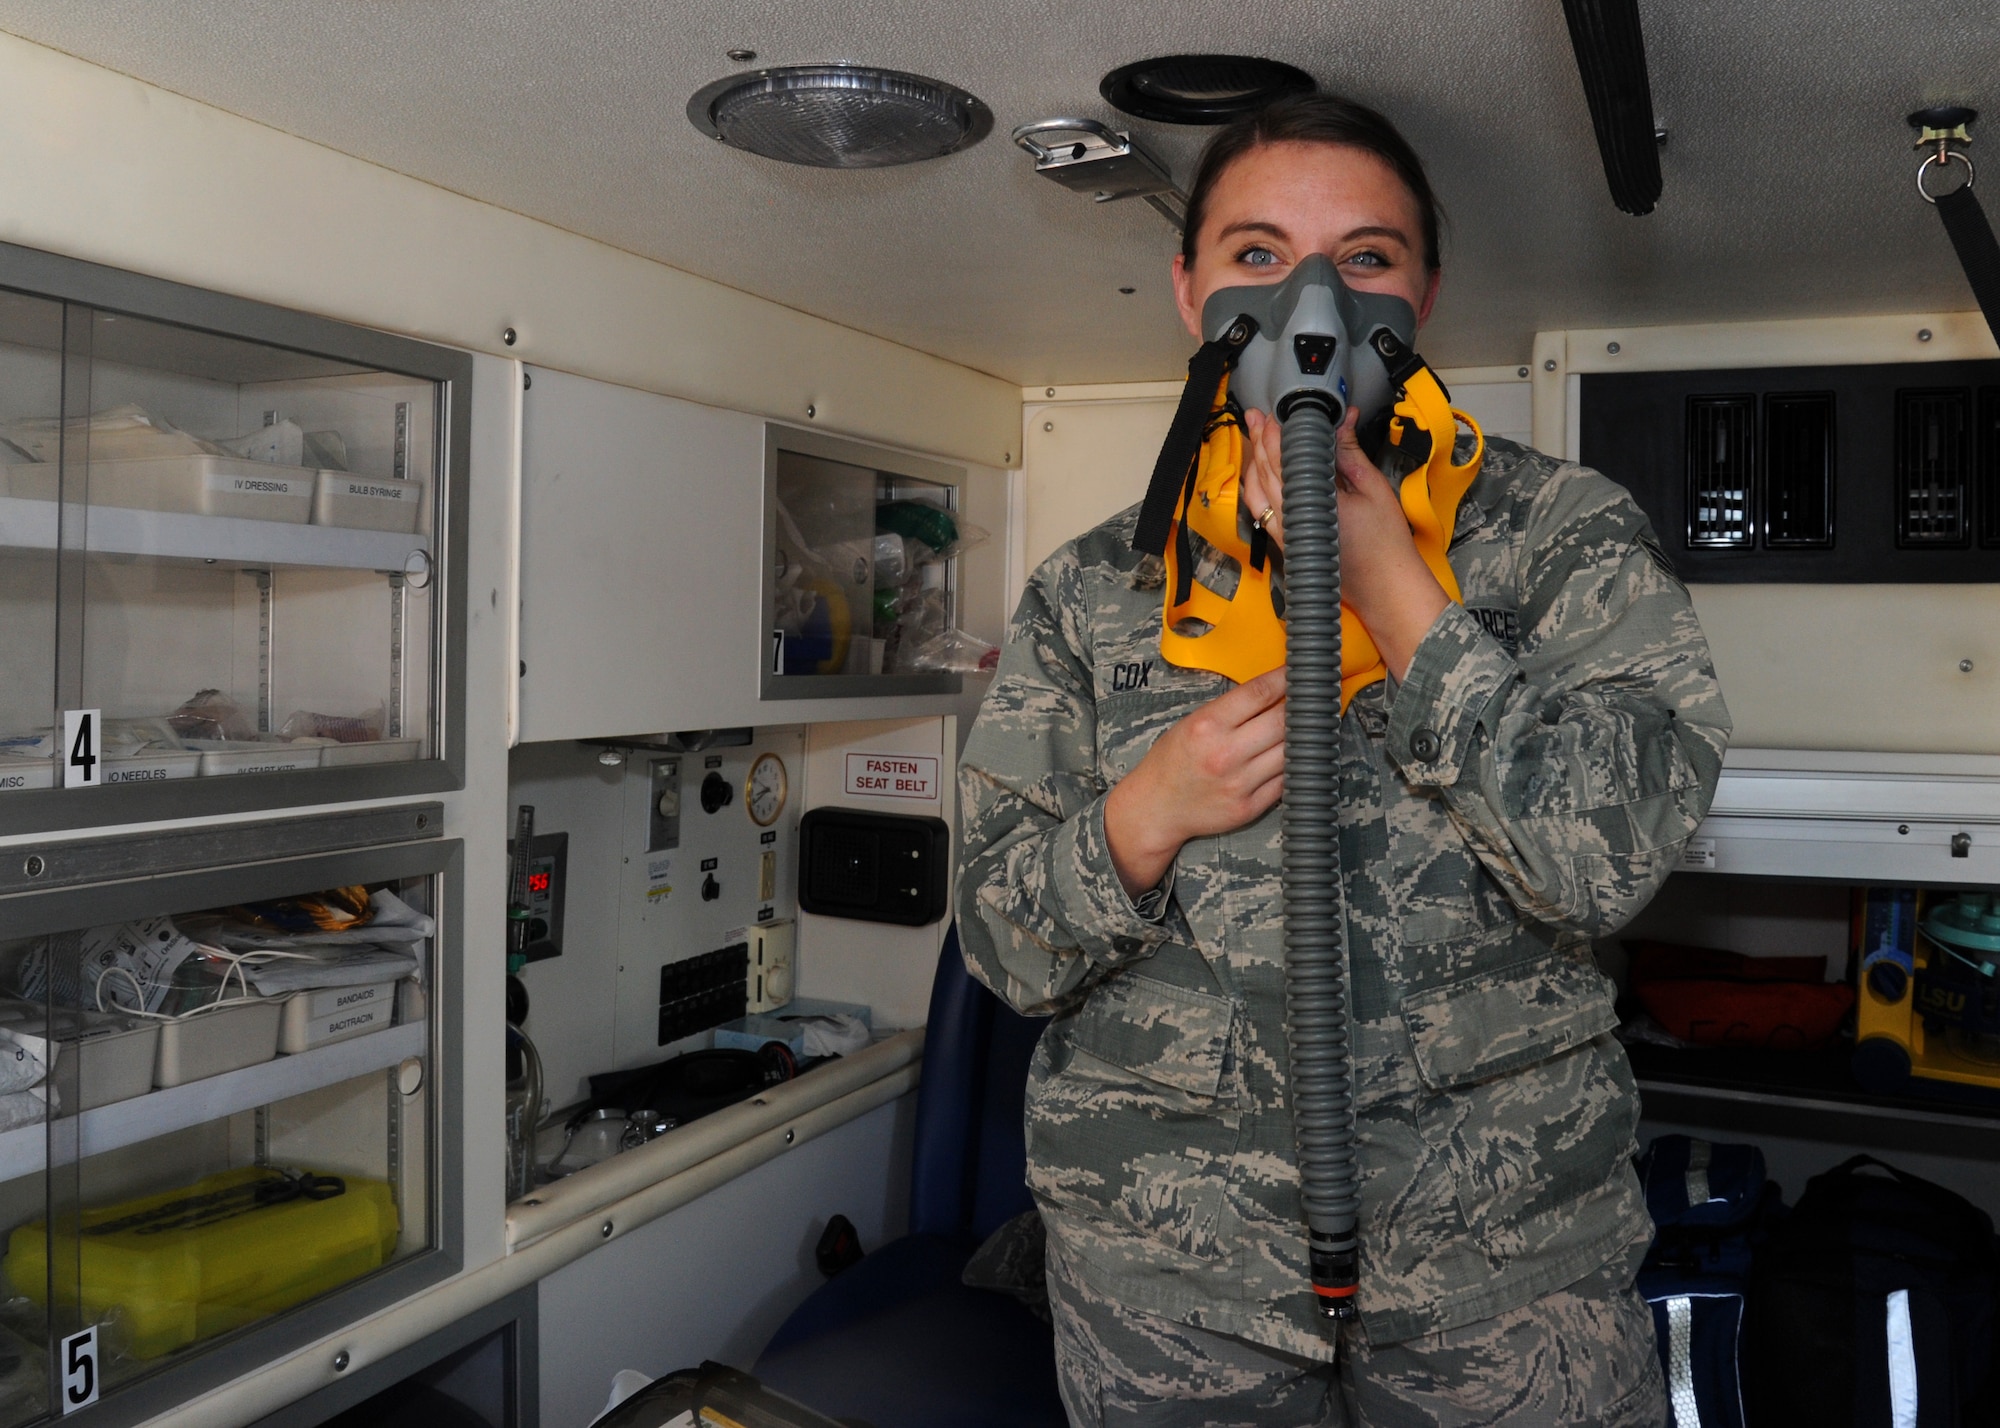 Senior Airman Ashley Cox, 92nd Medical Operations Squadron emergency medical technician, demonstrates how to use an oxygen mask, Aug. 18, 2016, at Fairchild Air Force Base, Wash. Fairchild ambulances are capable of transporting up to four casualties at one time. (U.S. Air Force photo/Senior Airman Samuel Fogleman)